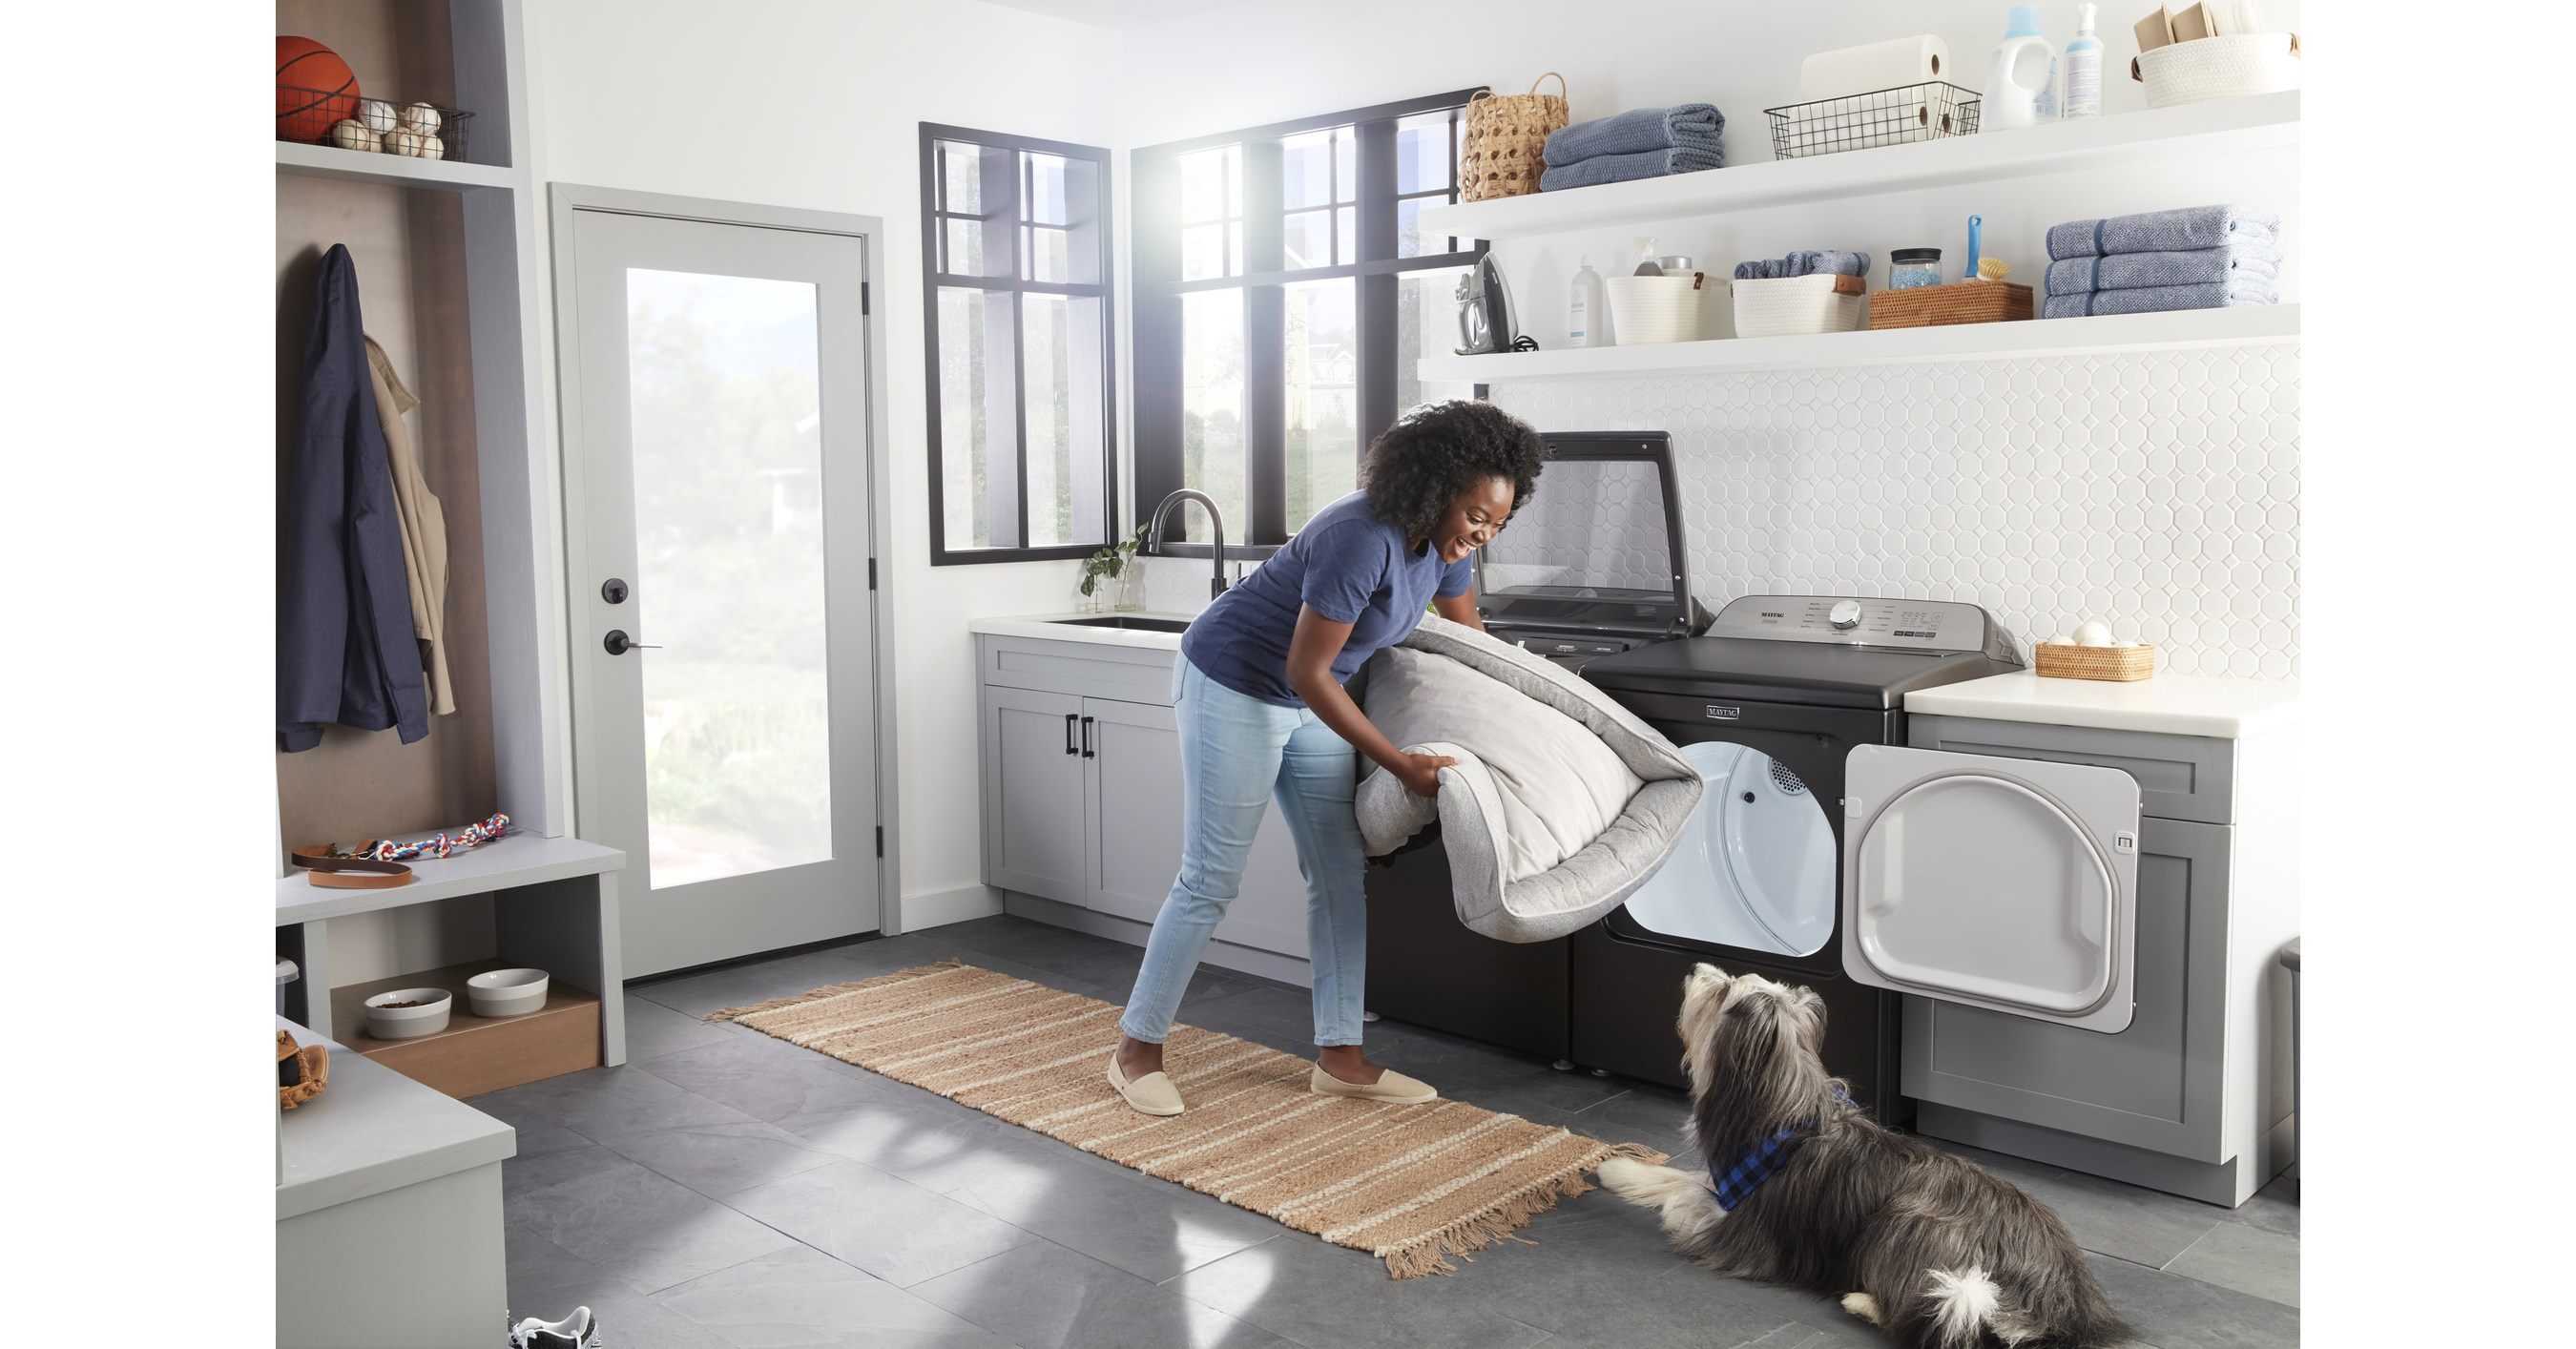 Maytag says its new laundry system will get rid of pet hair